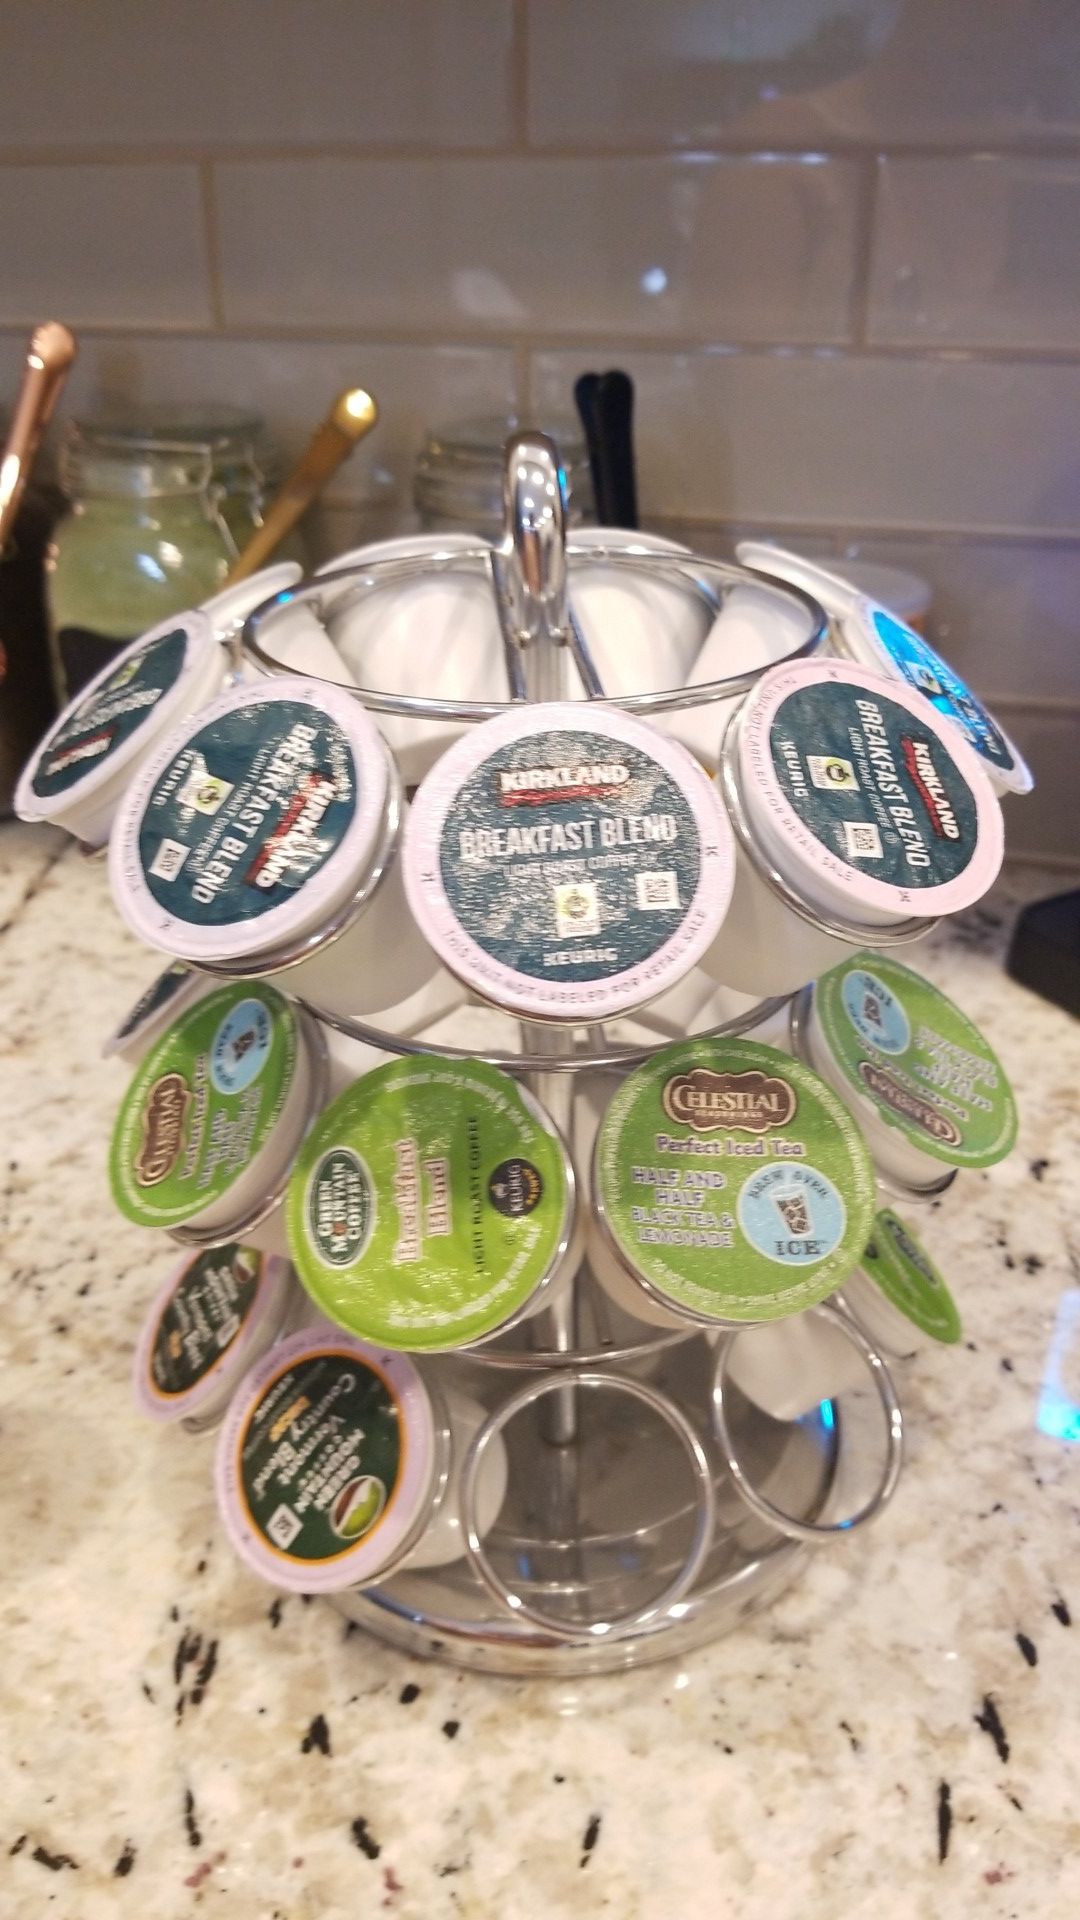 Keurig K-cup Carousel. Holds 27 kcups. Comes with 27 variety of flavor cups PLUS bonus 3 Carafe Cups